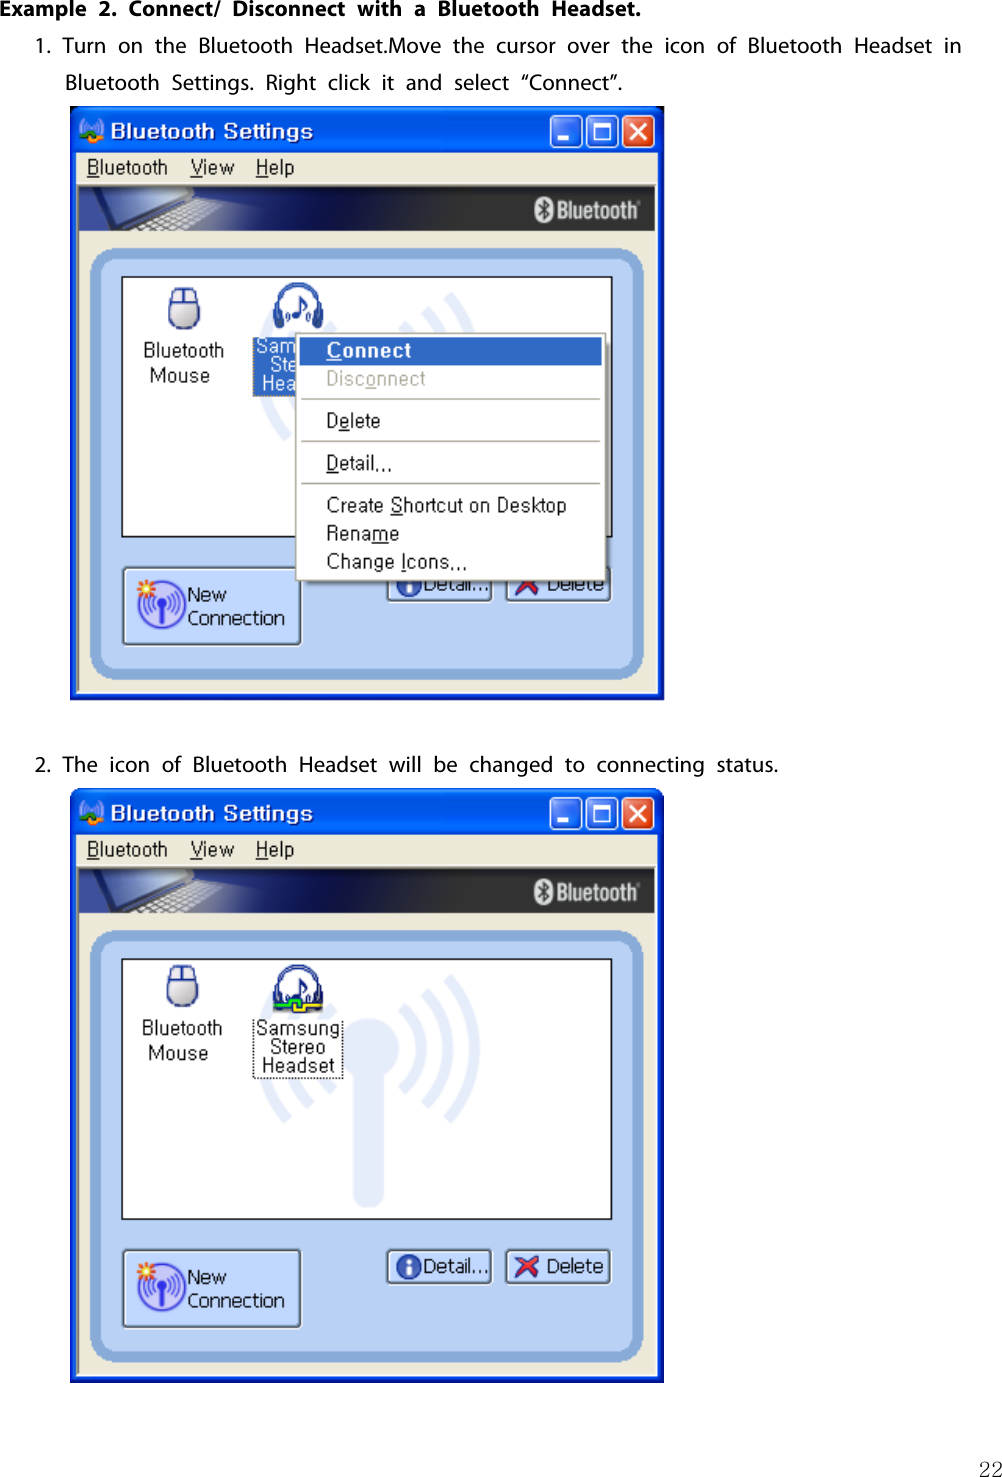 22Example 2. Connect/ Disconnect with a Bluetooth Headset.1. Turn on the Bluetooth Headset.Move the cursor over the icon of Bluetooth Headset inBluetooth Settings. Right click it and select “Connect”.2. The icon of Bluetooth Headset will be changed to connecting status.